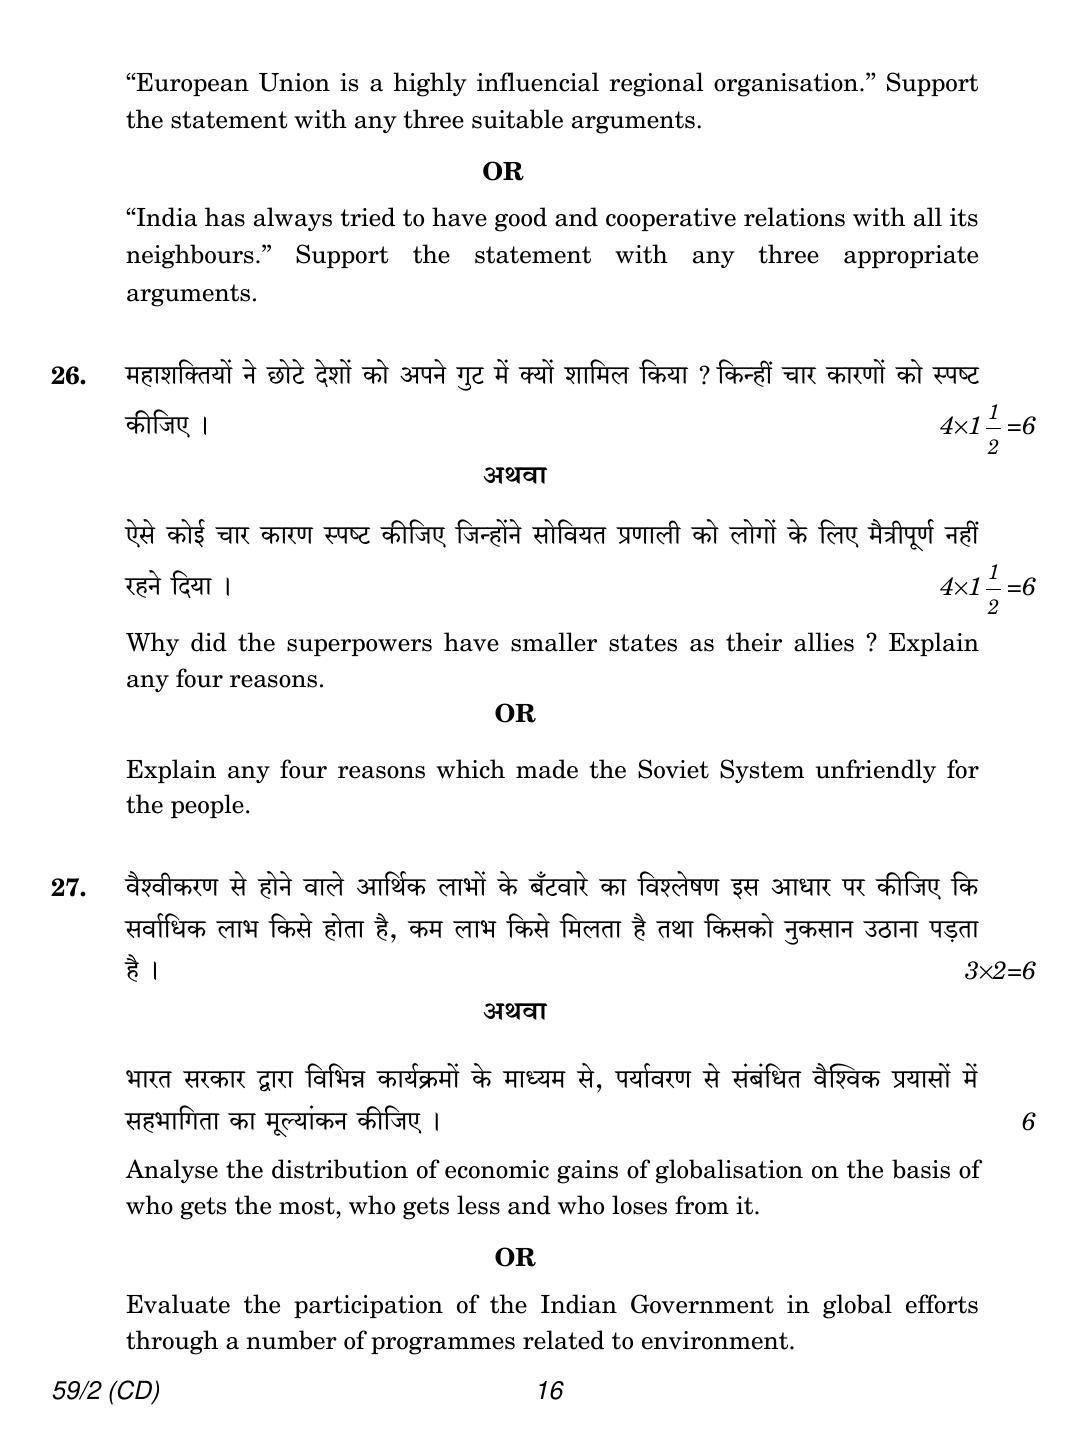 CBSE Class 12 59-2 POLITICAL SCIENCE CD 2018 Question Paper - Page 16